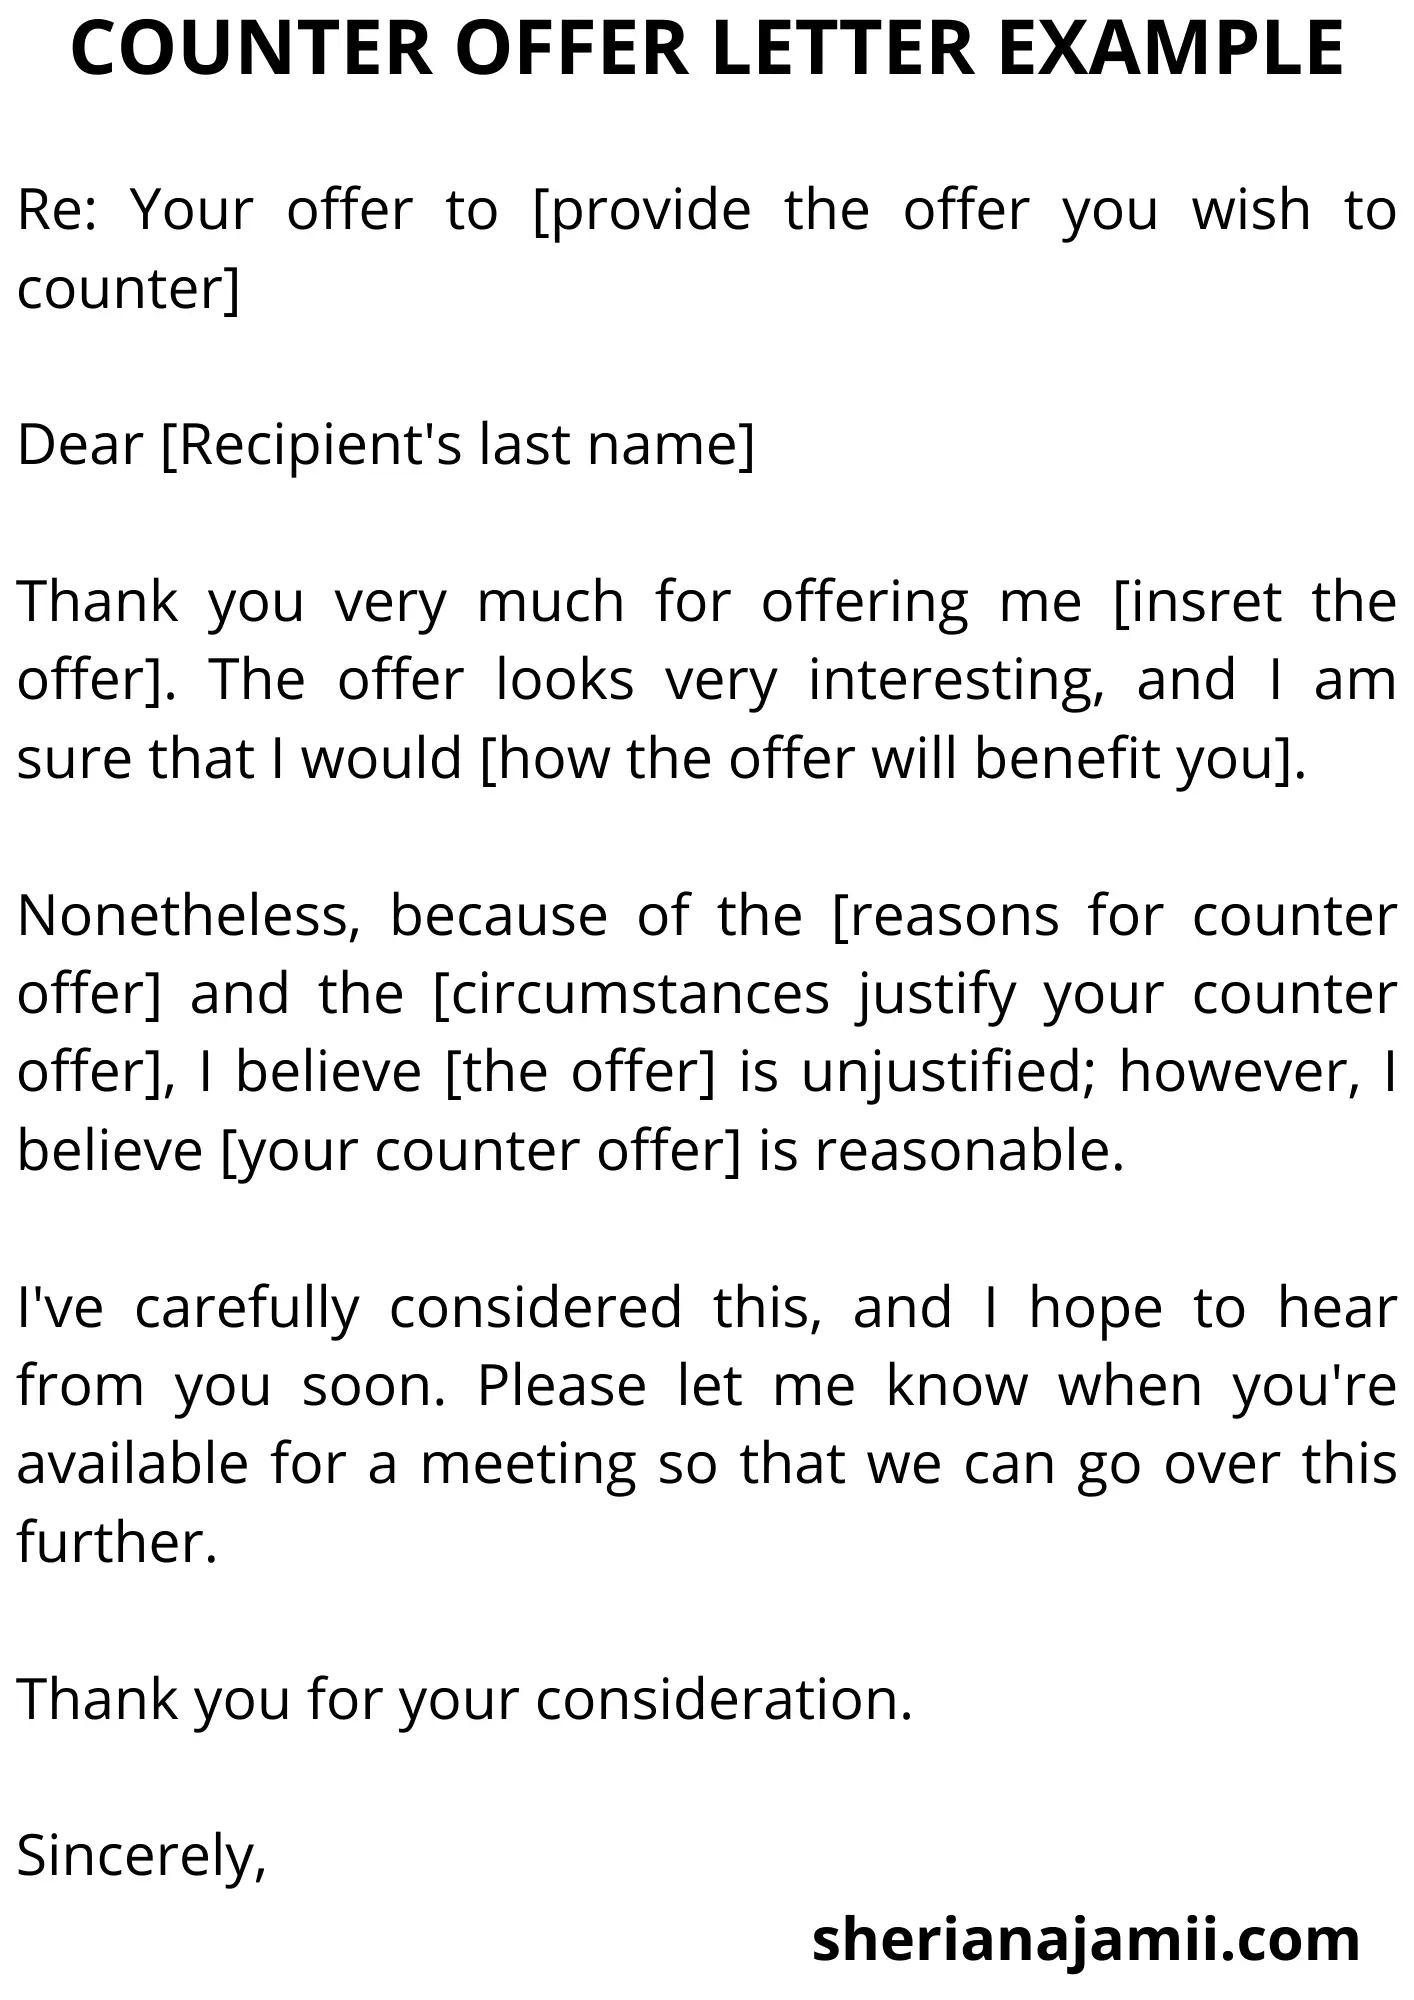 Counter offer letter example, Counter offer letter template